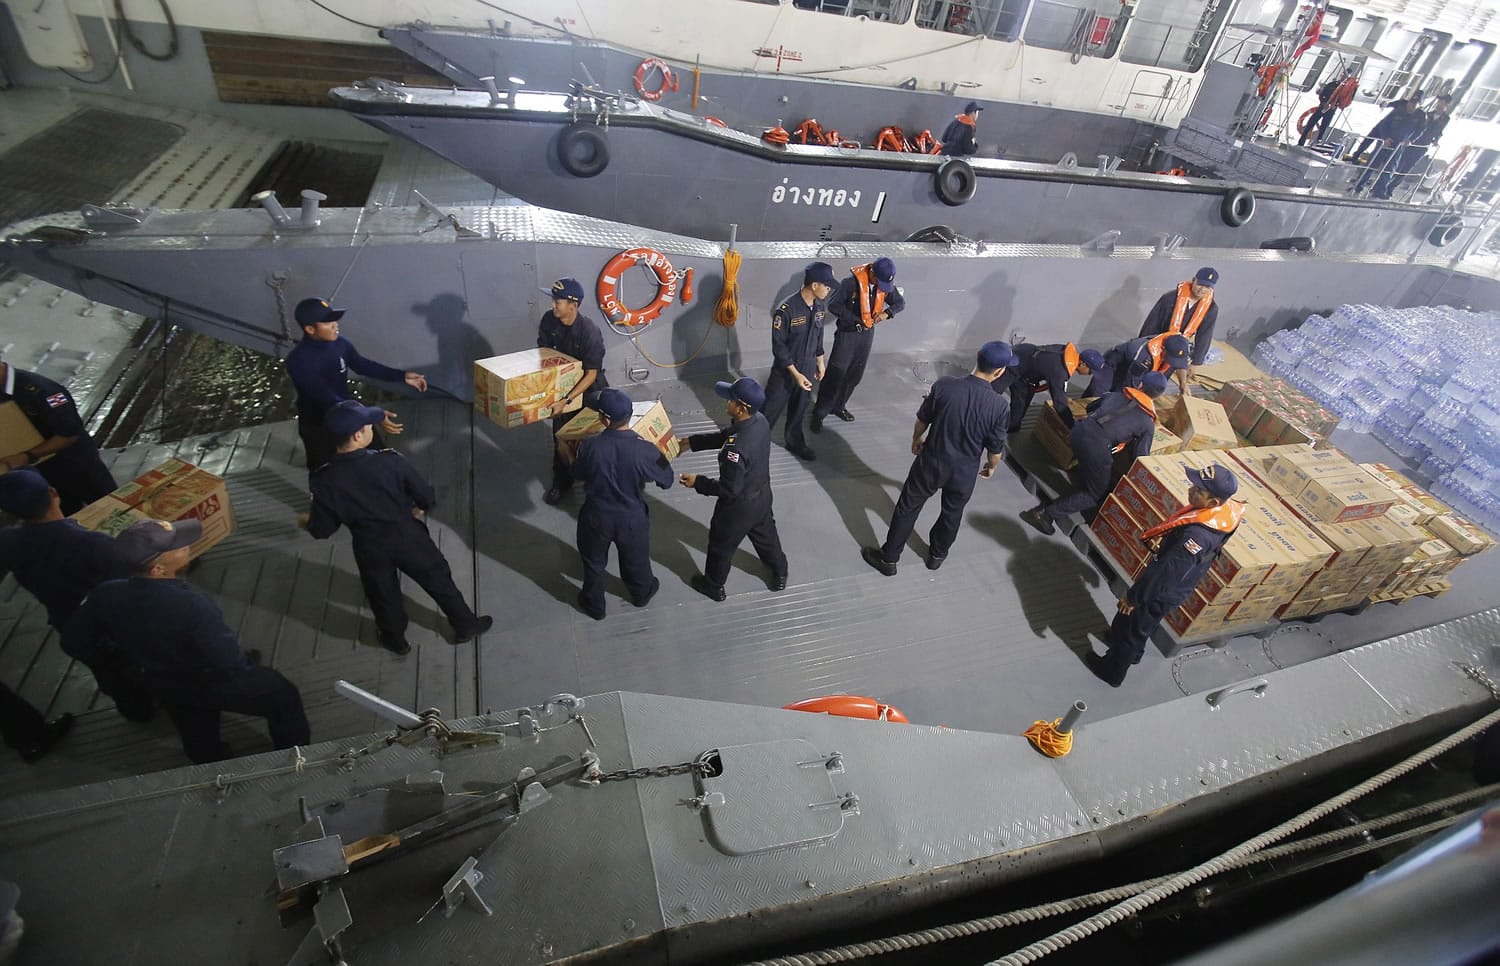 Thai navy officers load food and water onto the HTMS Angthong of the Royal Thai navy on Friday.